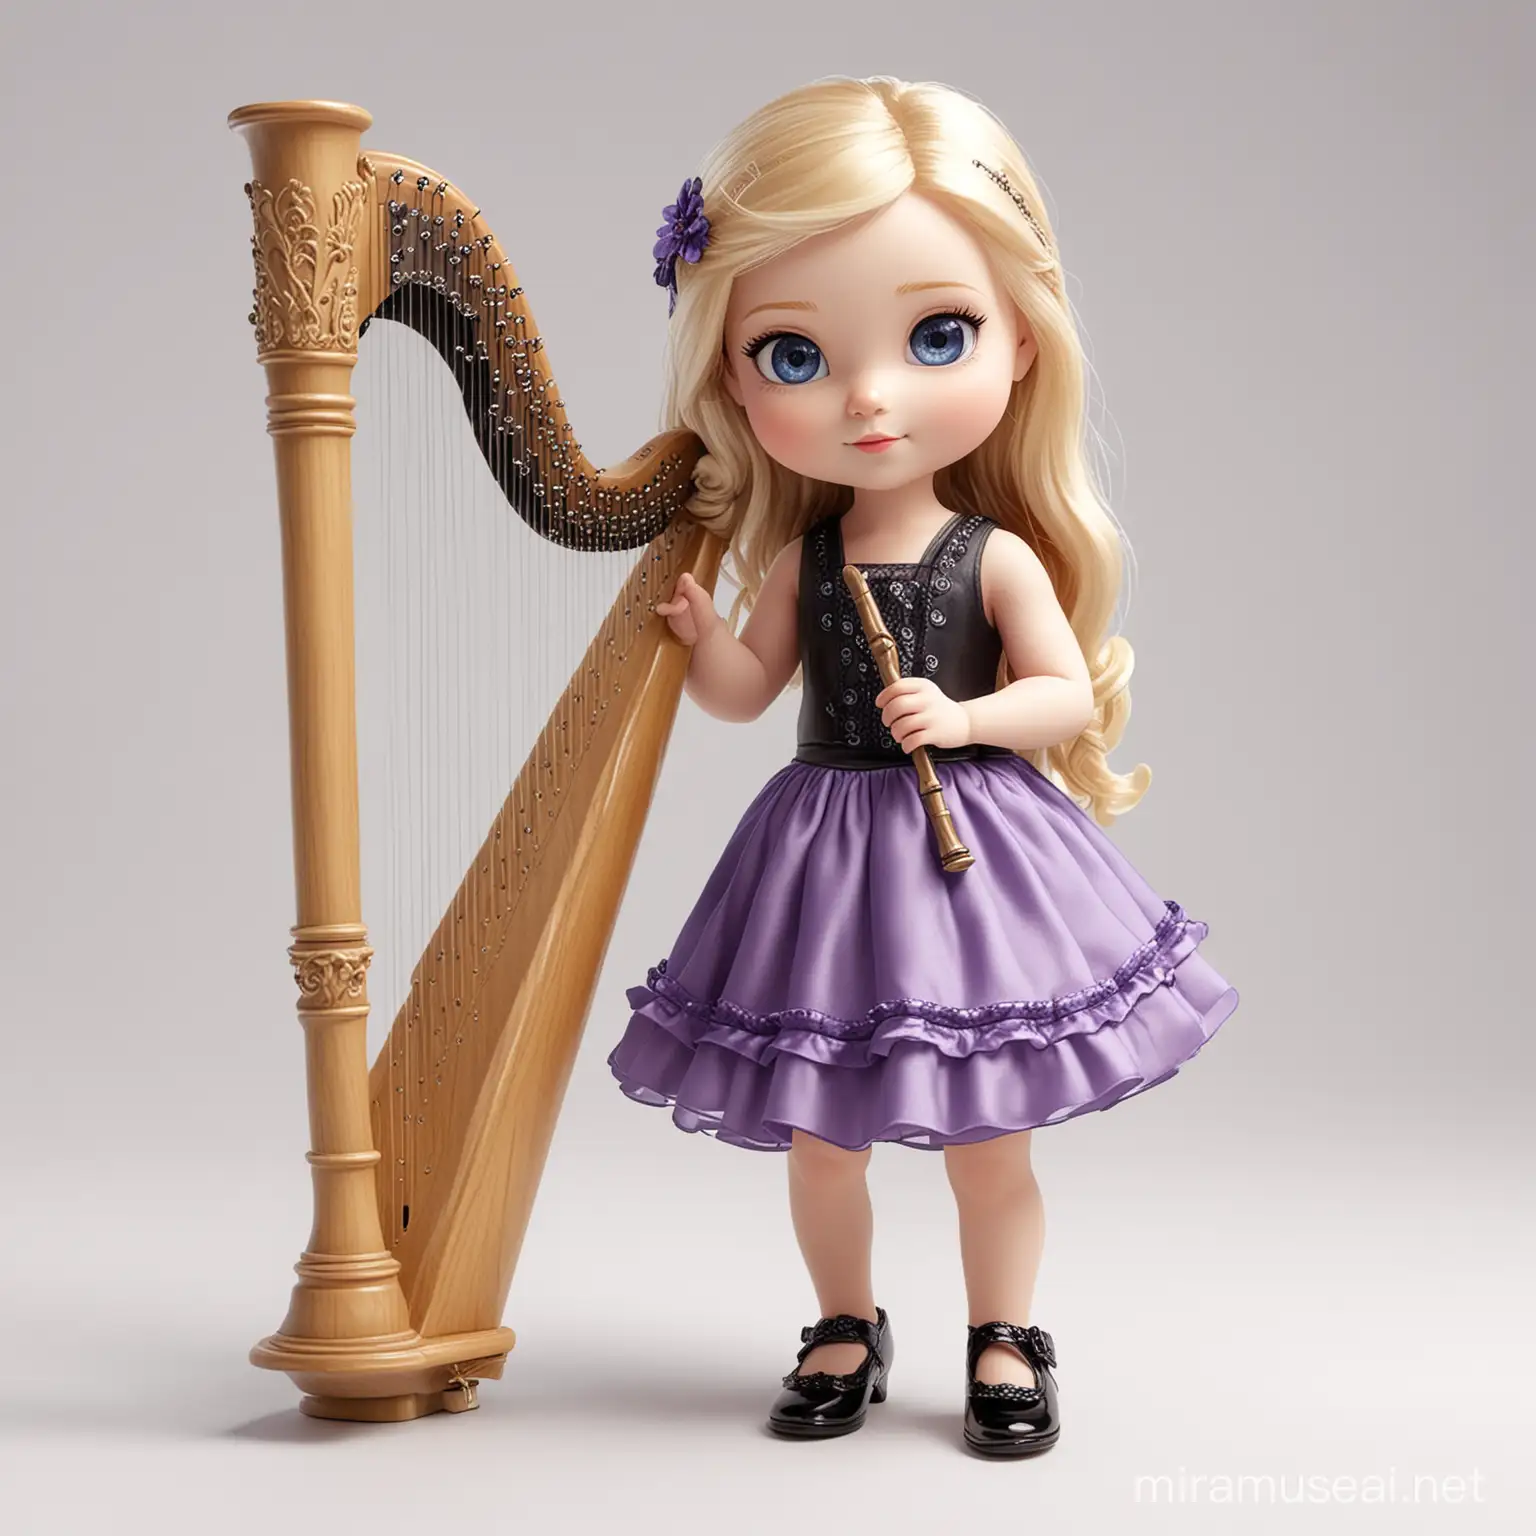 female child with blond hair, blue eyes, wearing a purple dress and black fancy shoes holding a harp and a flute on a white background
chibi style 